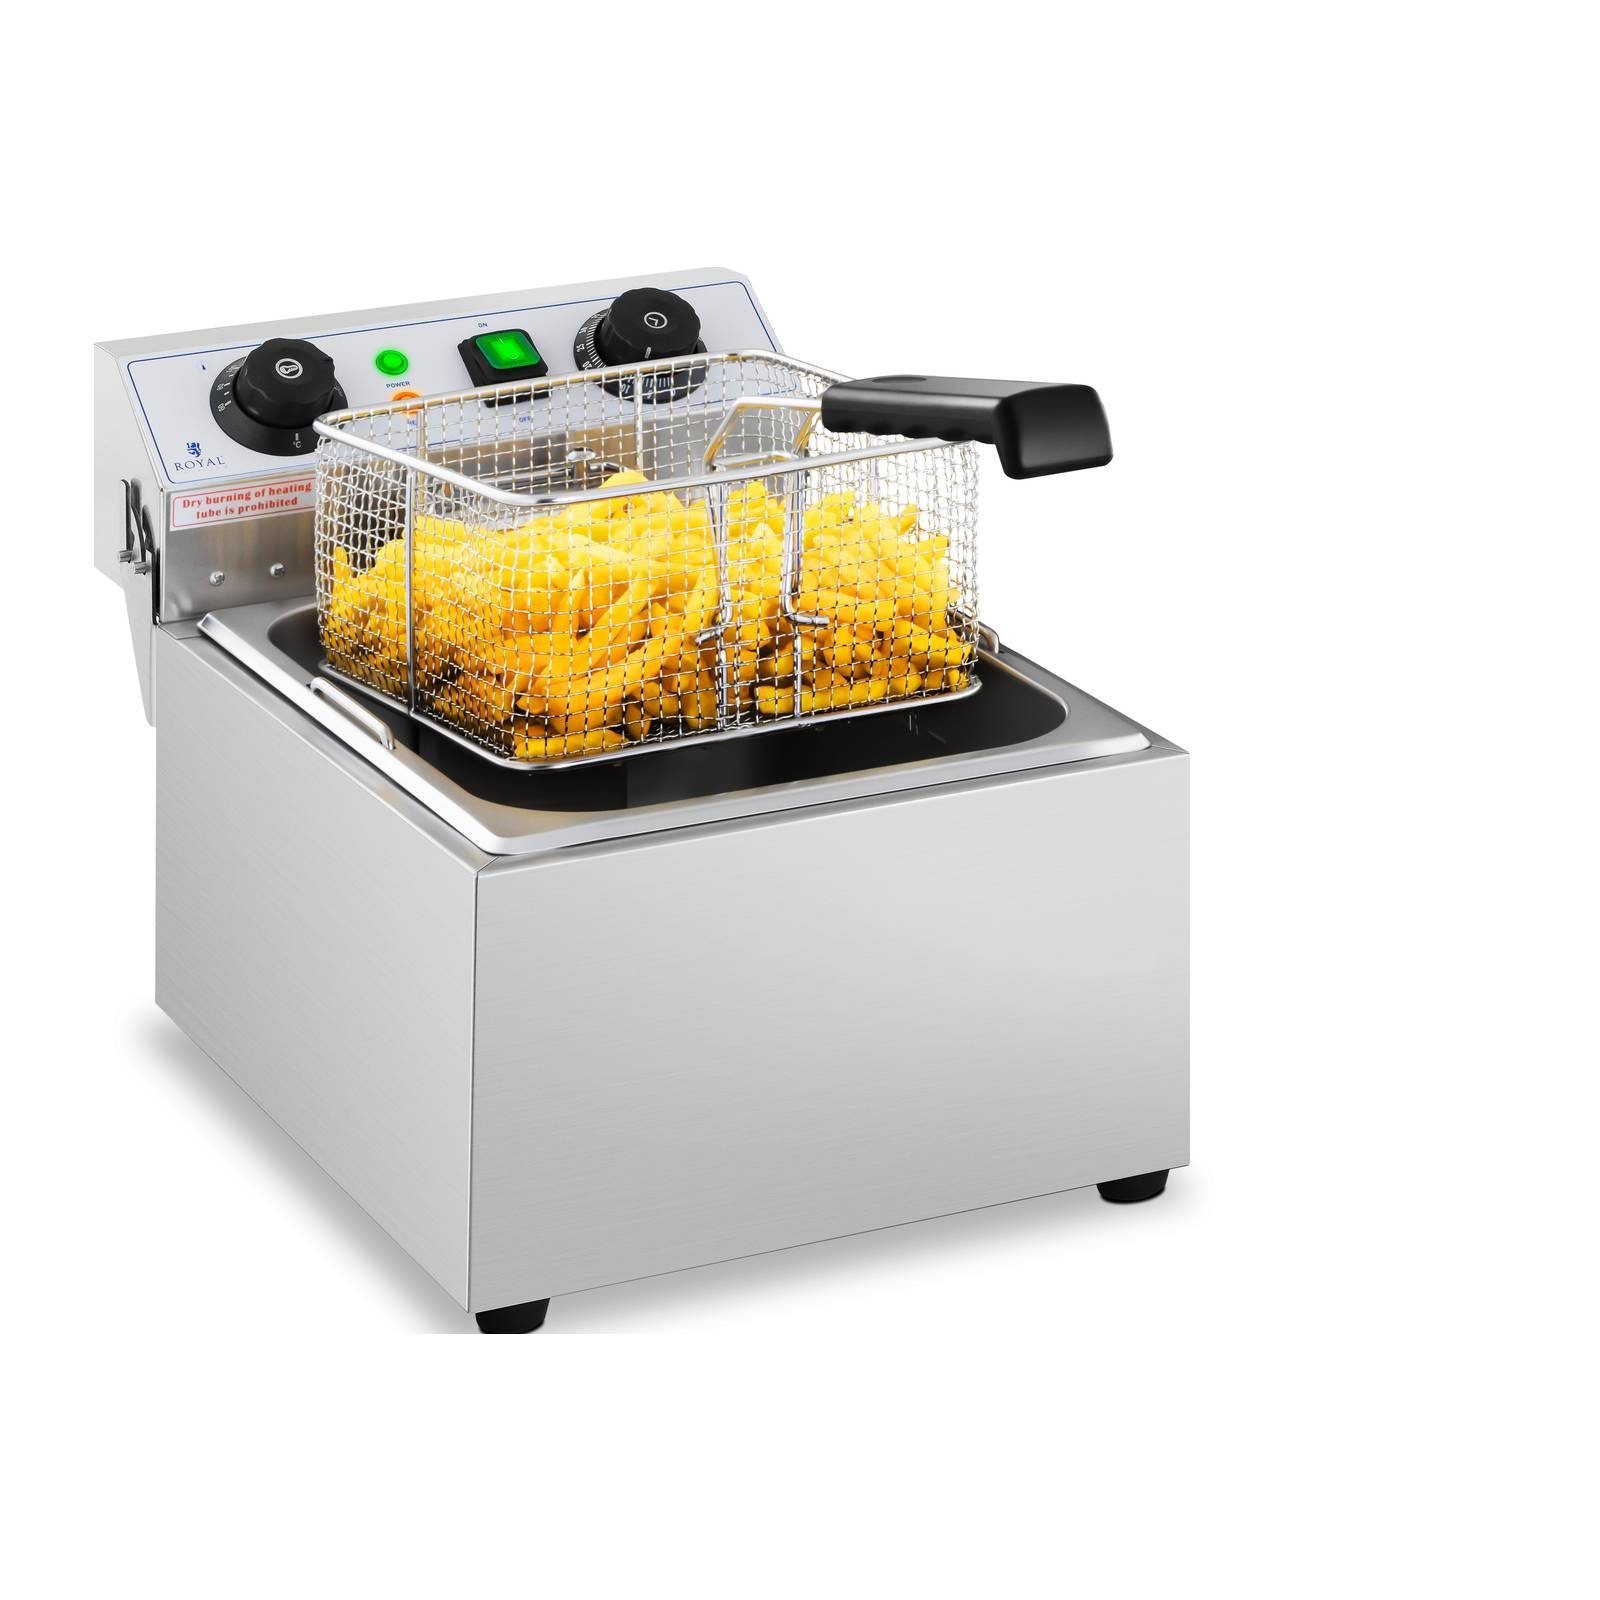 Royal Catering Fritteuse Fritteuse Edelstahl Gastronomie Elektro Fritteuse 10 L Kaltzone 3200 W, 3200 W